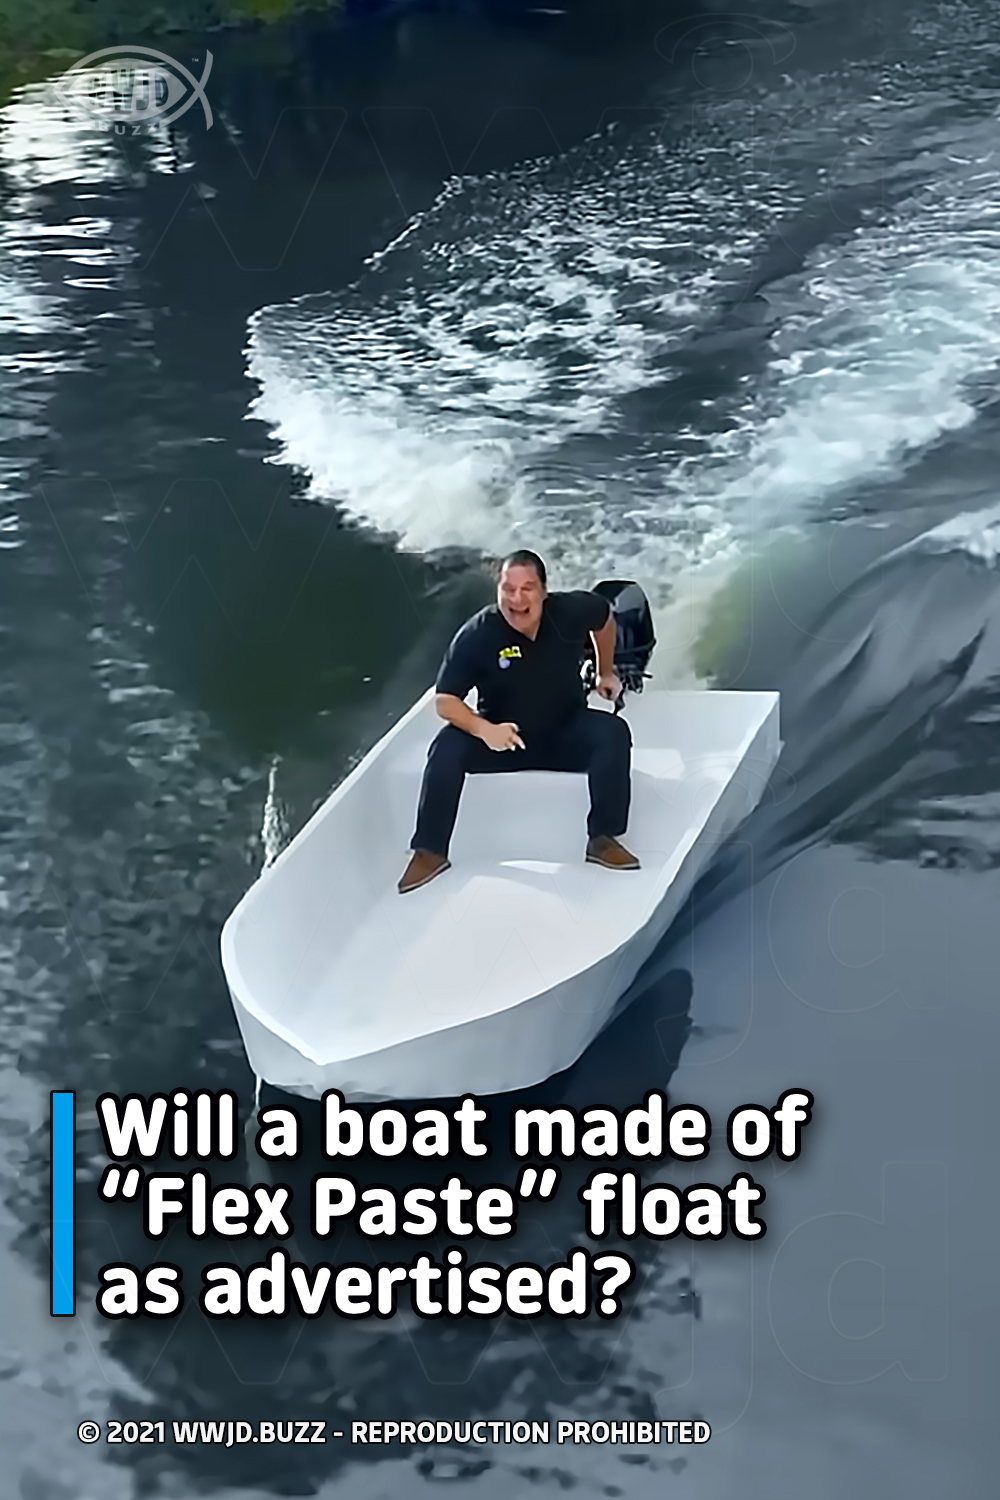 Will a boat made of “Flex Paste” float as advertised?